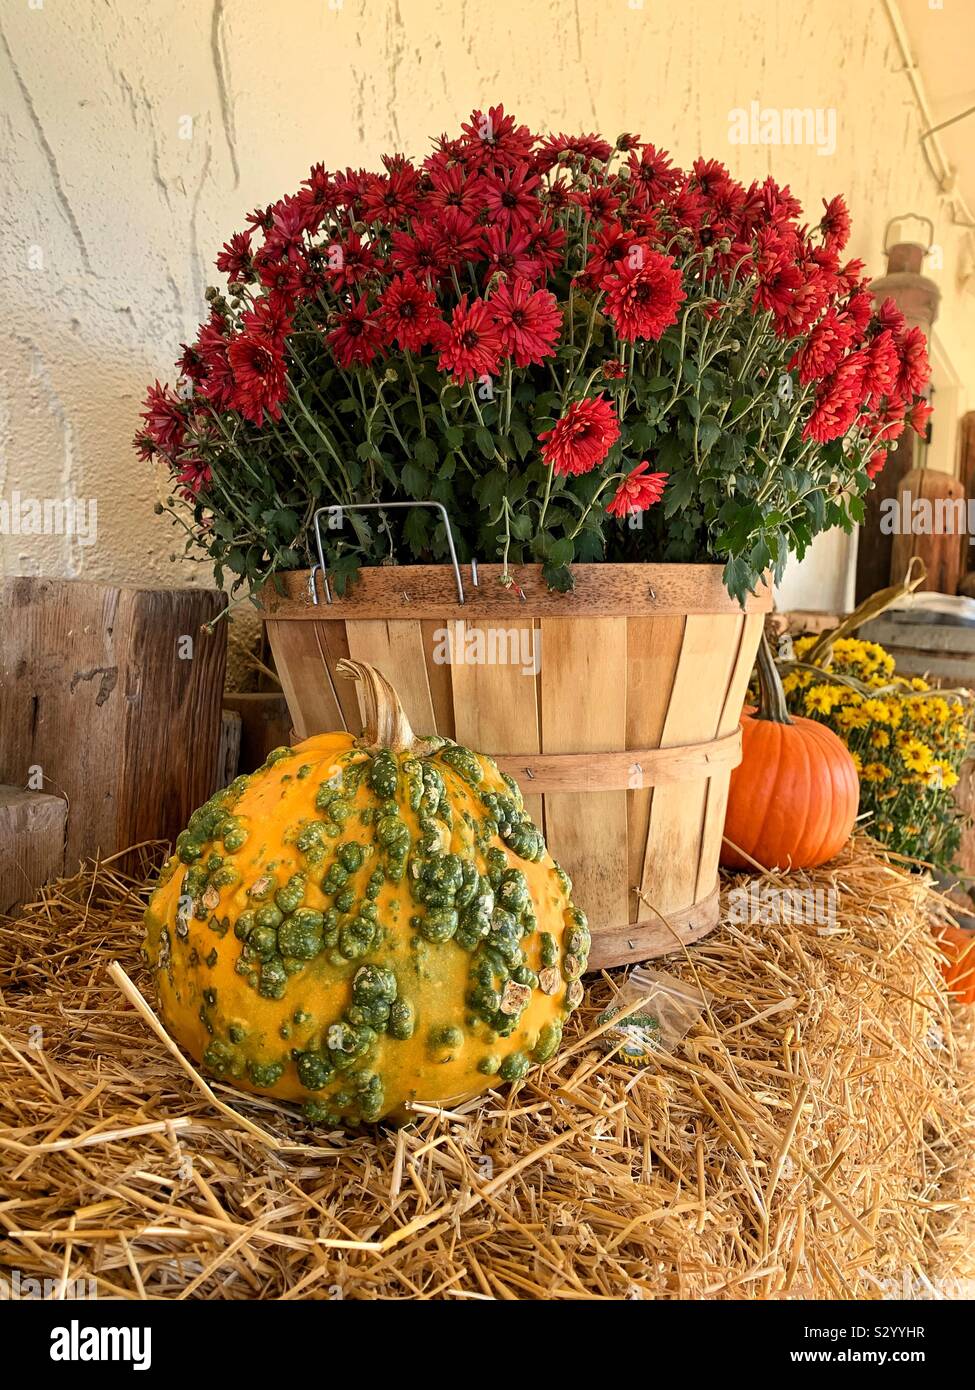 A yellow pumpkin full of green warts and a bunch of red mums sitting on a bale of hay. Stock Photo